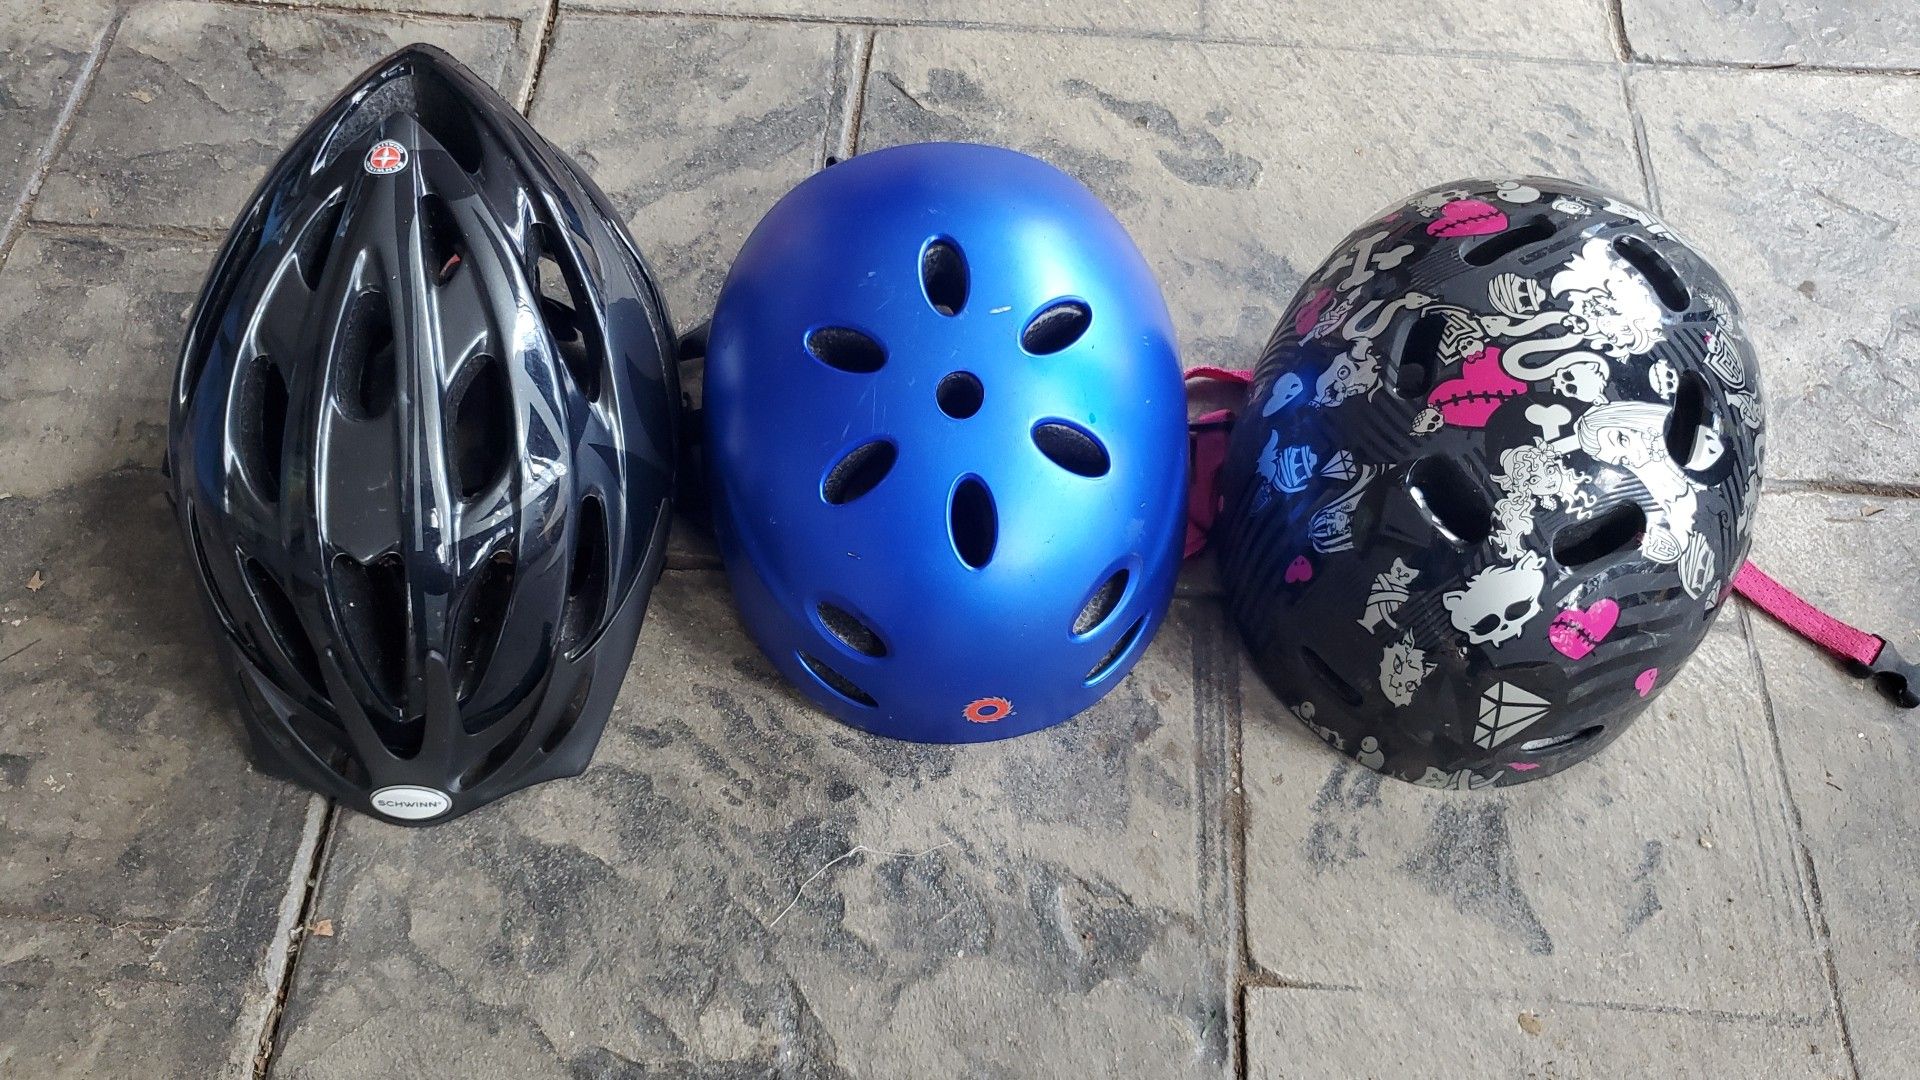 Bicycle helmets in great condition Each $10 Blue Black and Pink with black all $10 Each